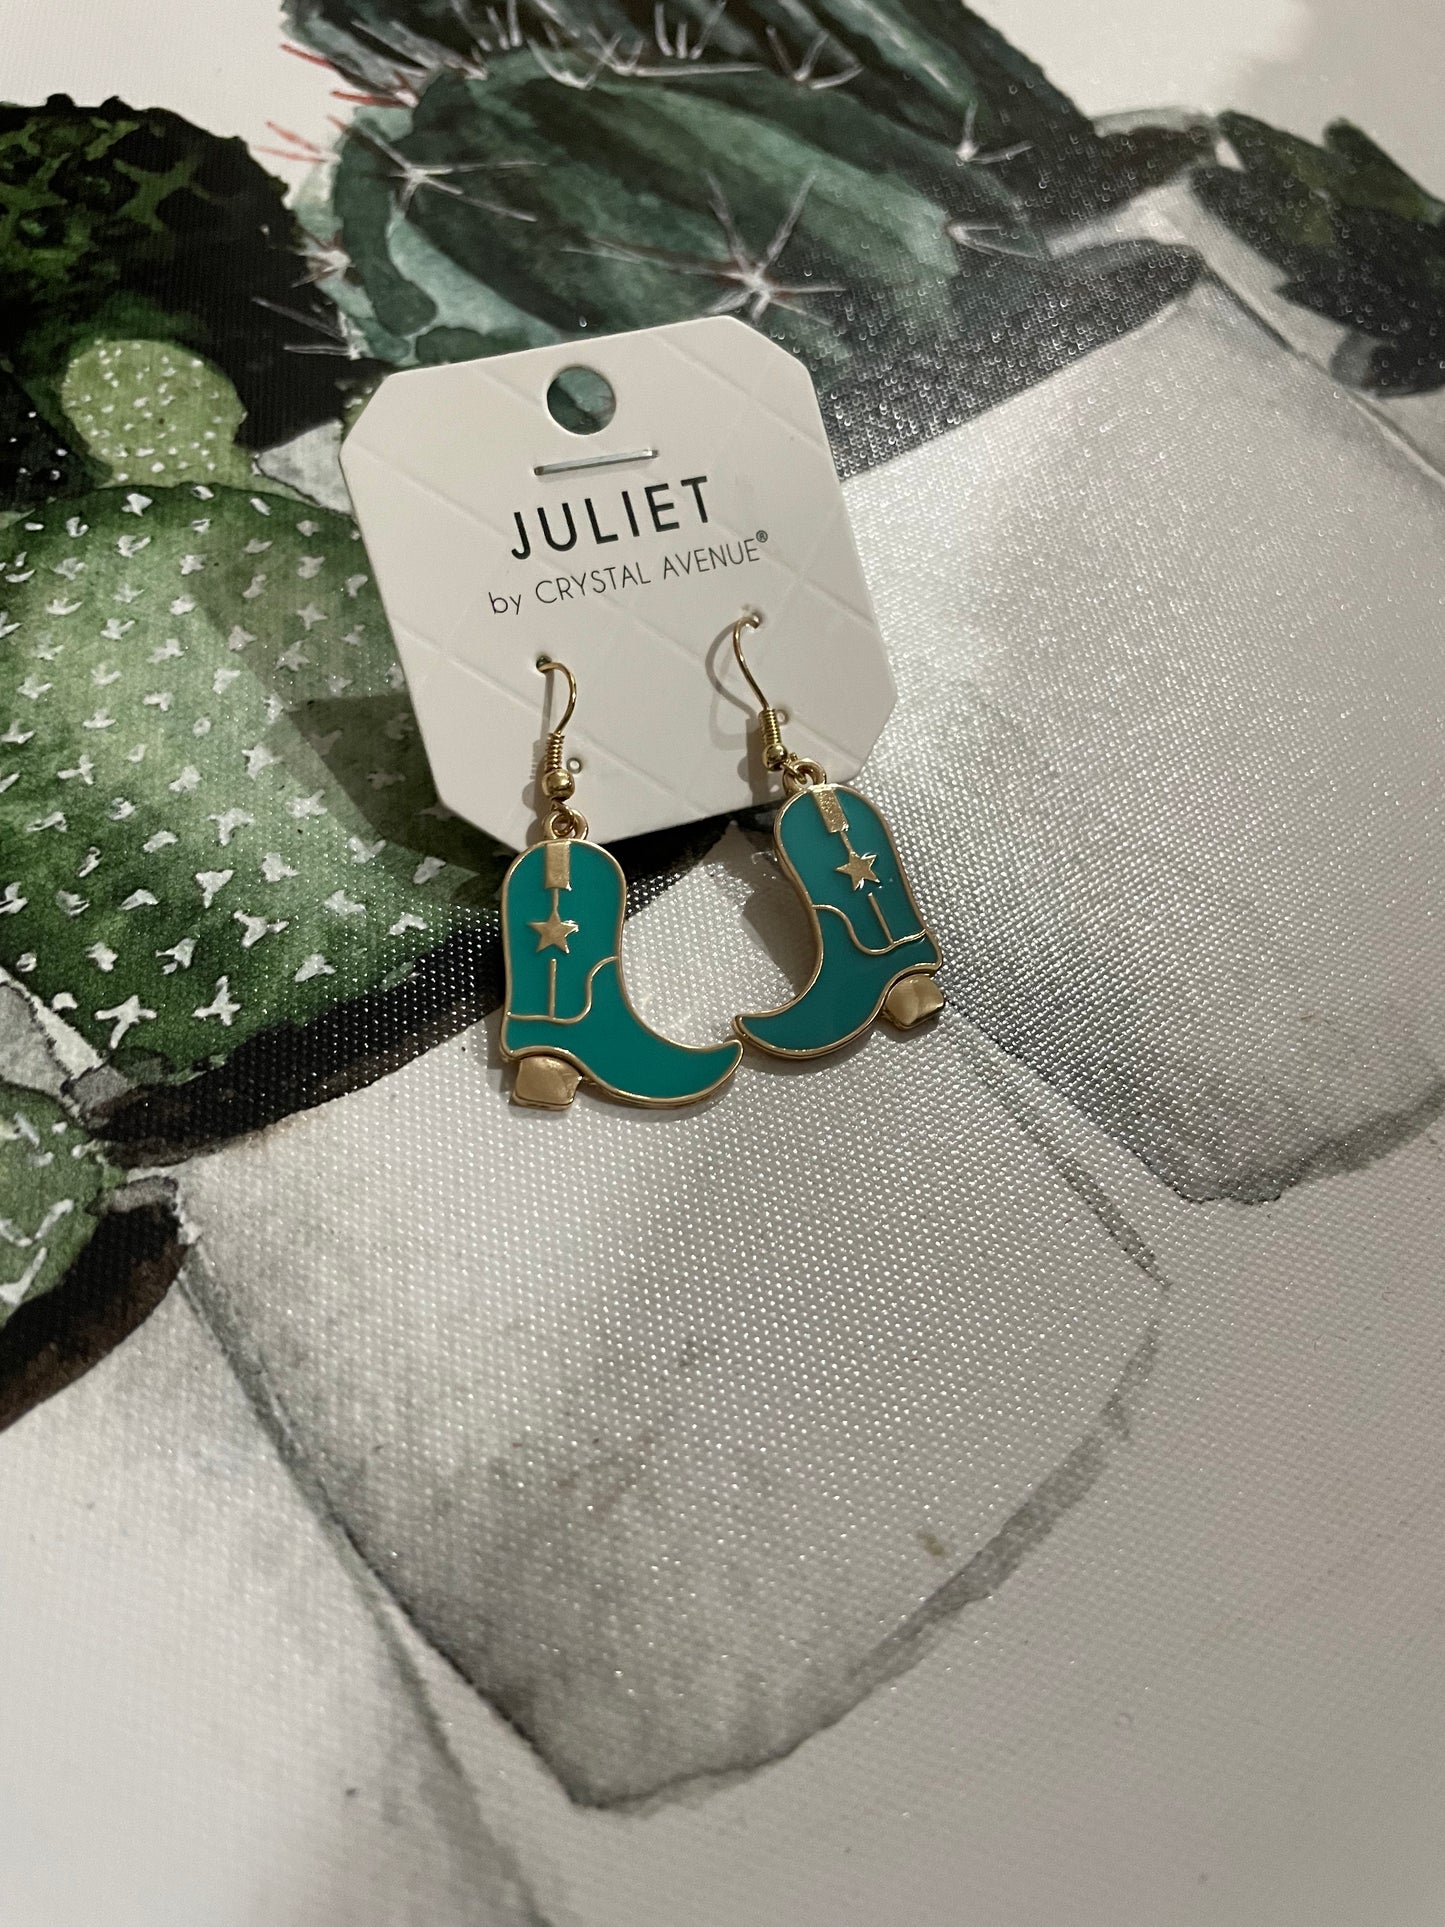 Turquoise Cowgirl Boot Earrings